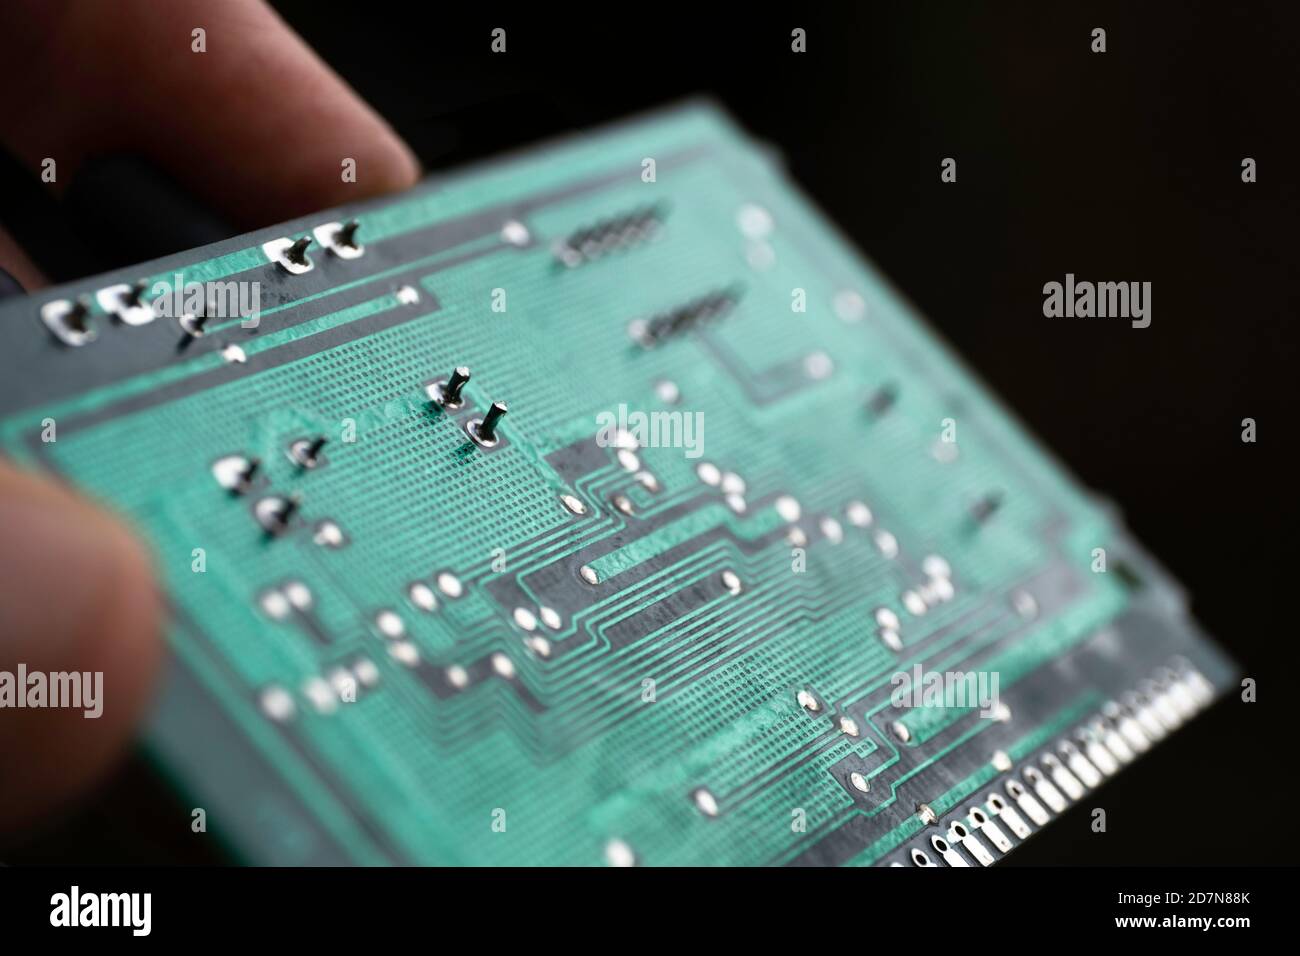 Fingers hold a green electronic circuit board with many electrical components against a black background Stock Photo